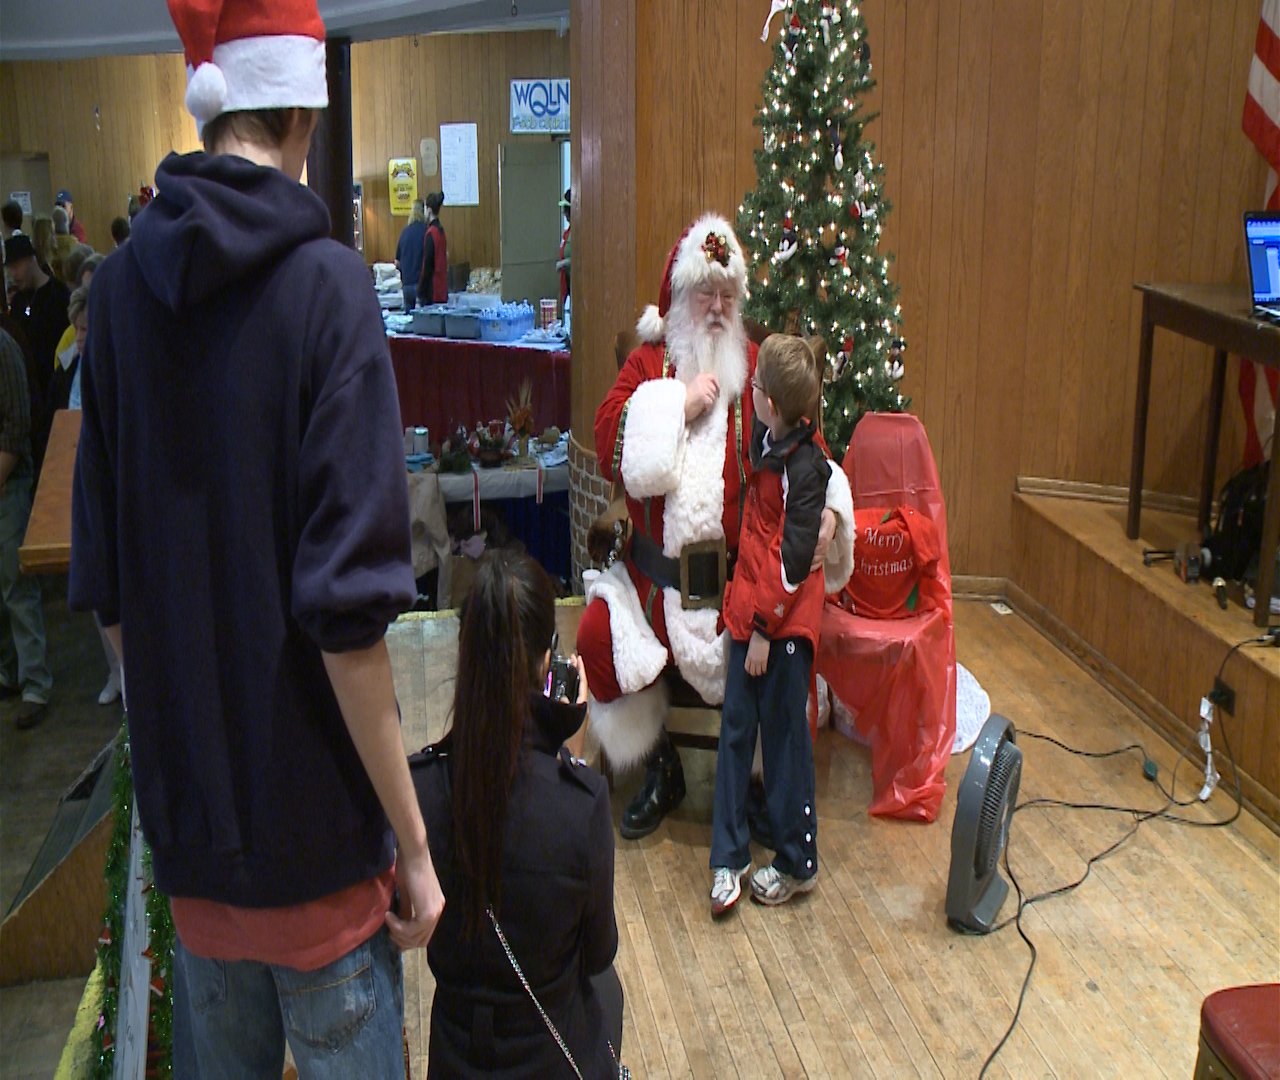 WQLN Holiday Craft Show Supports Local Economy Erie News Now WICU